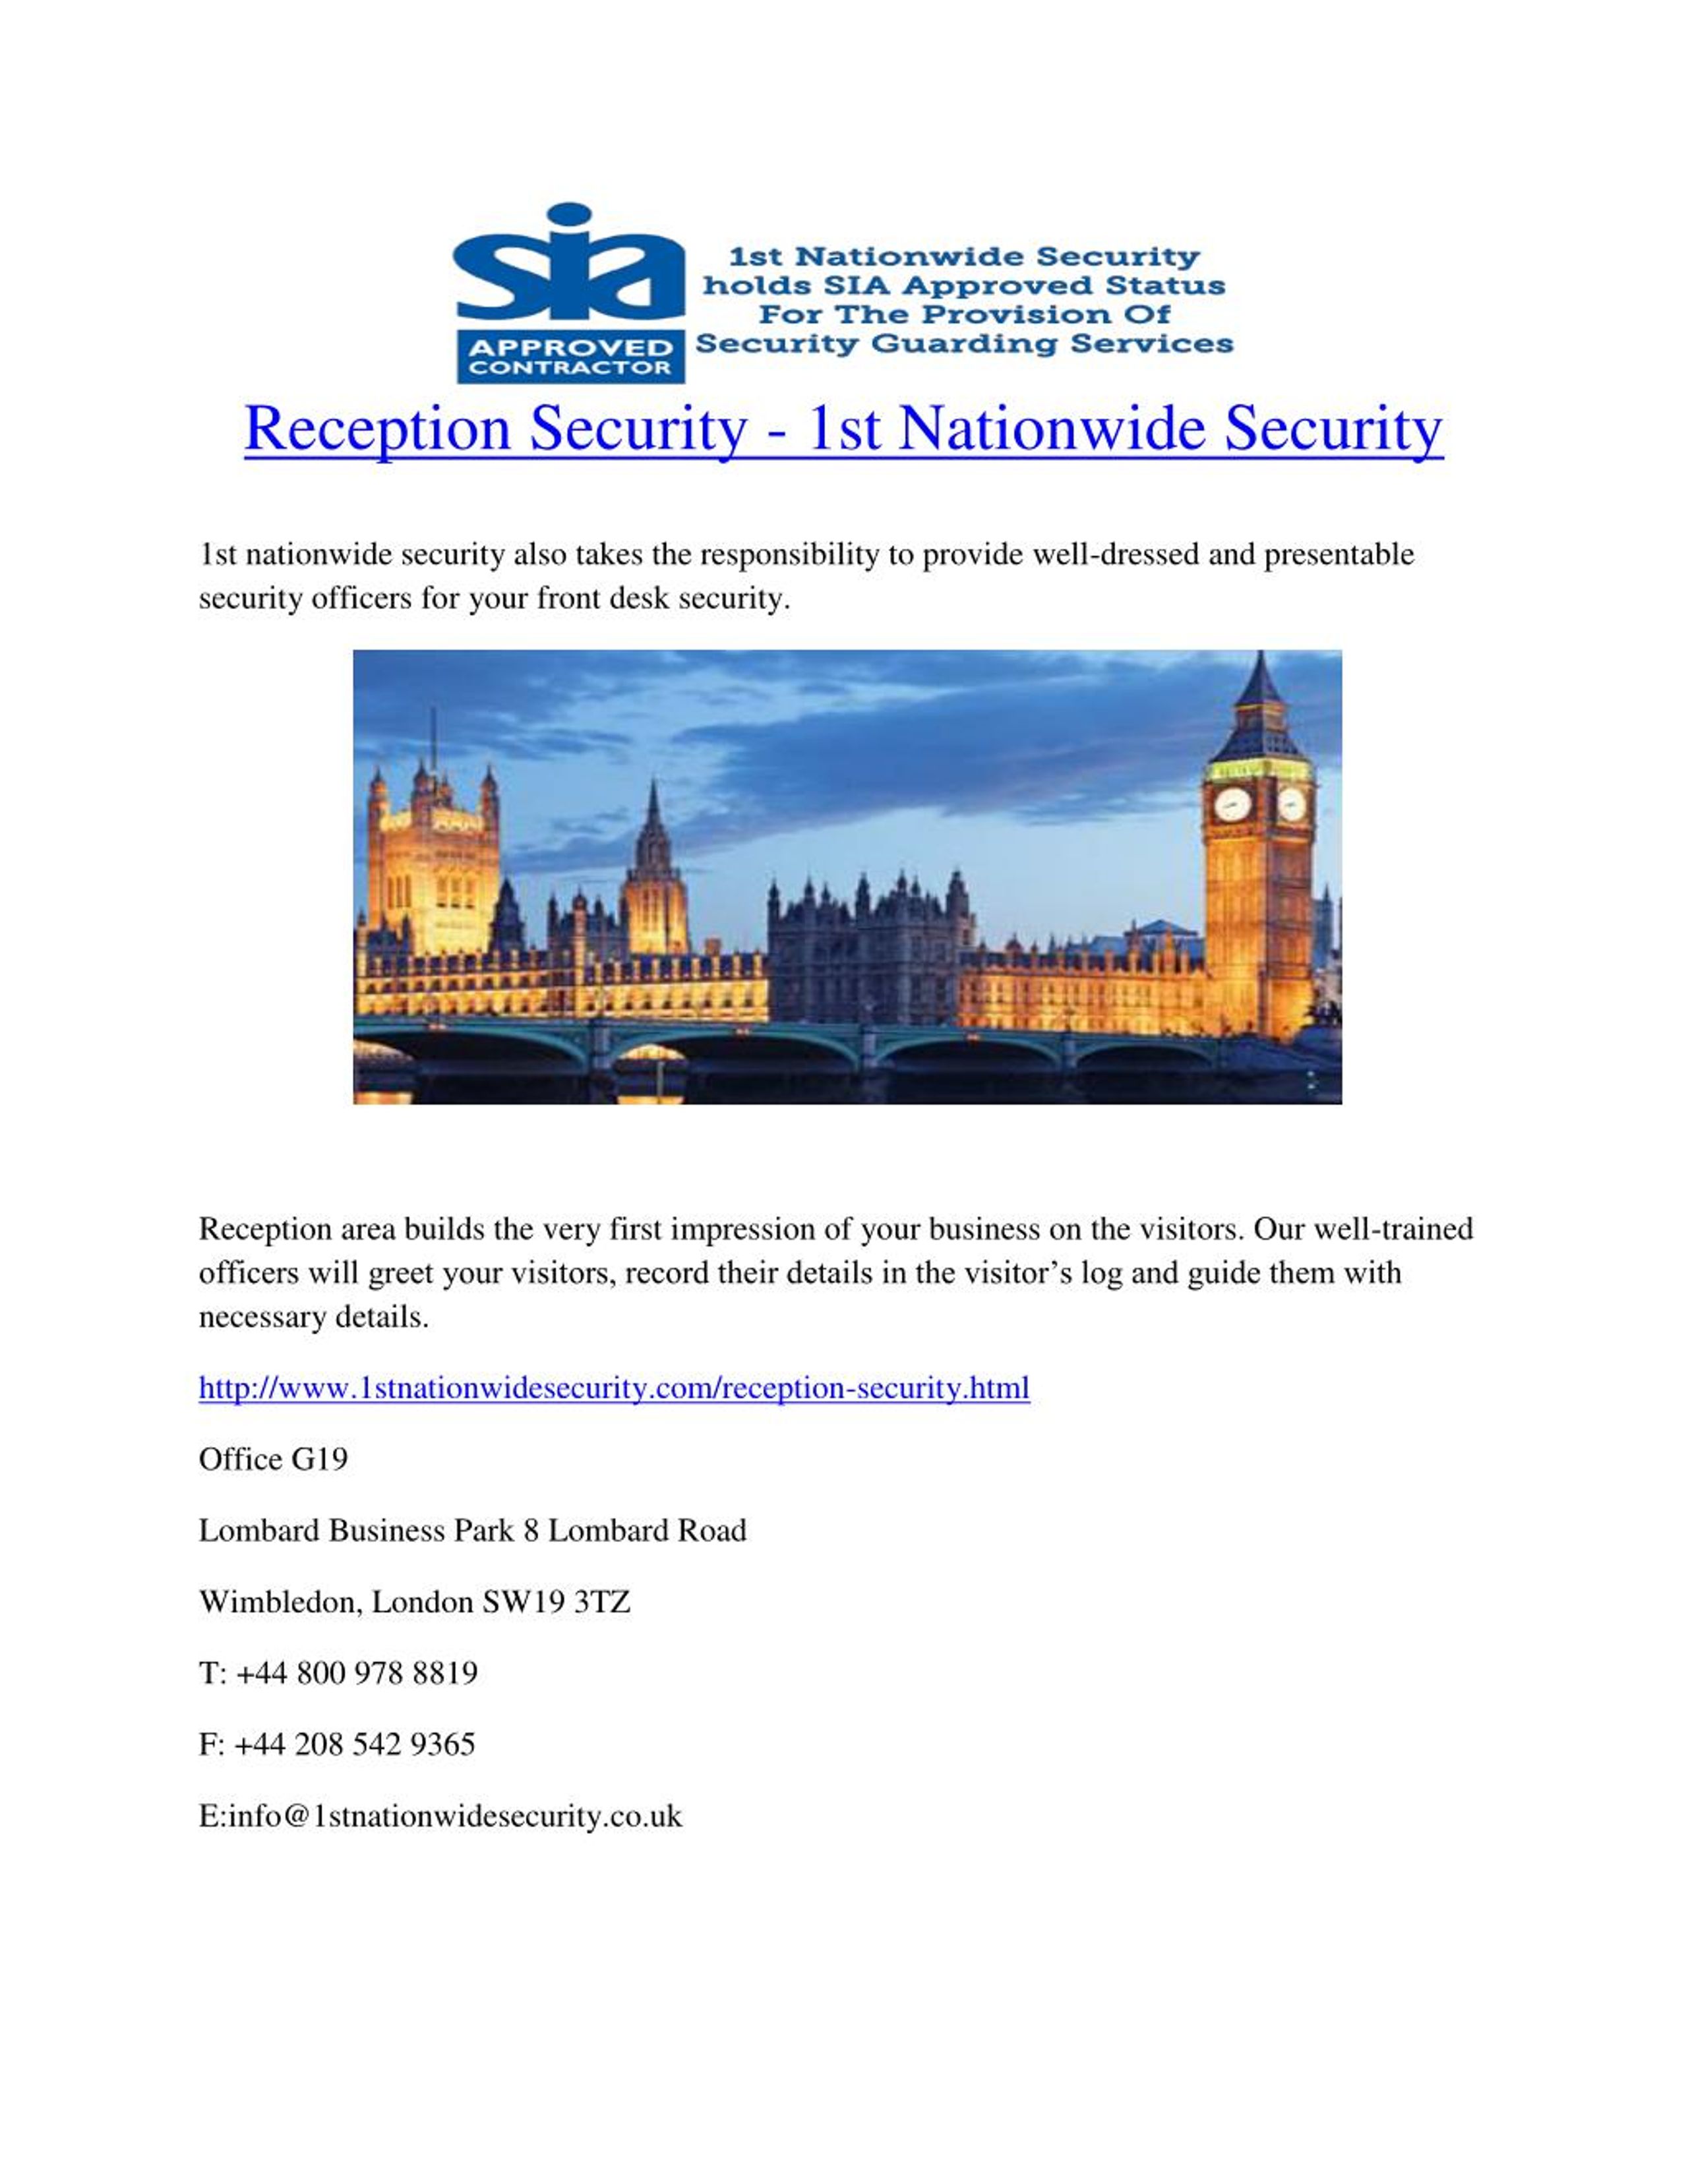 Ppt Reception Security 1st Nationwide Security Powerpoint